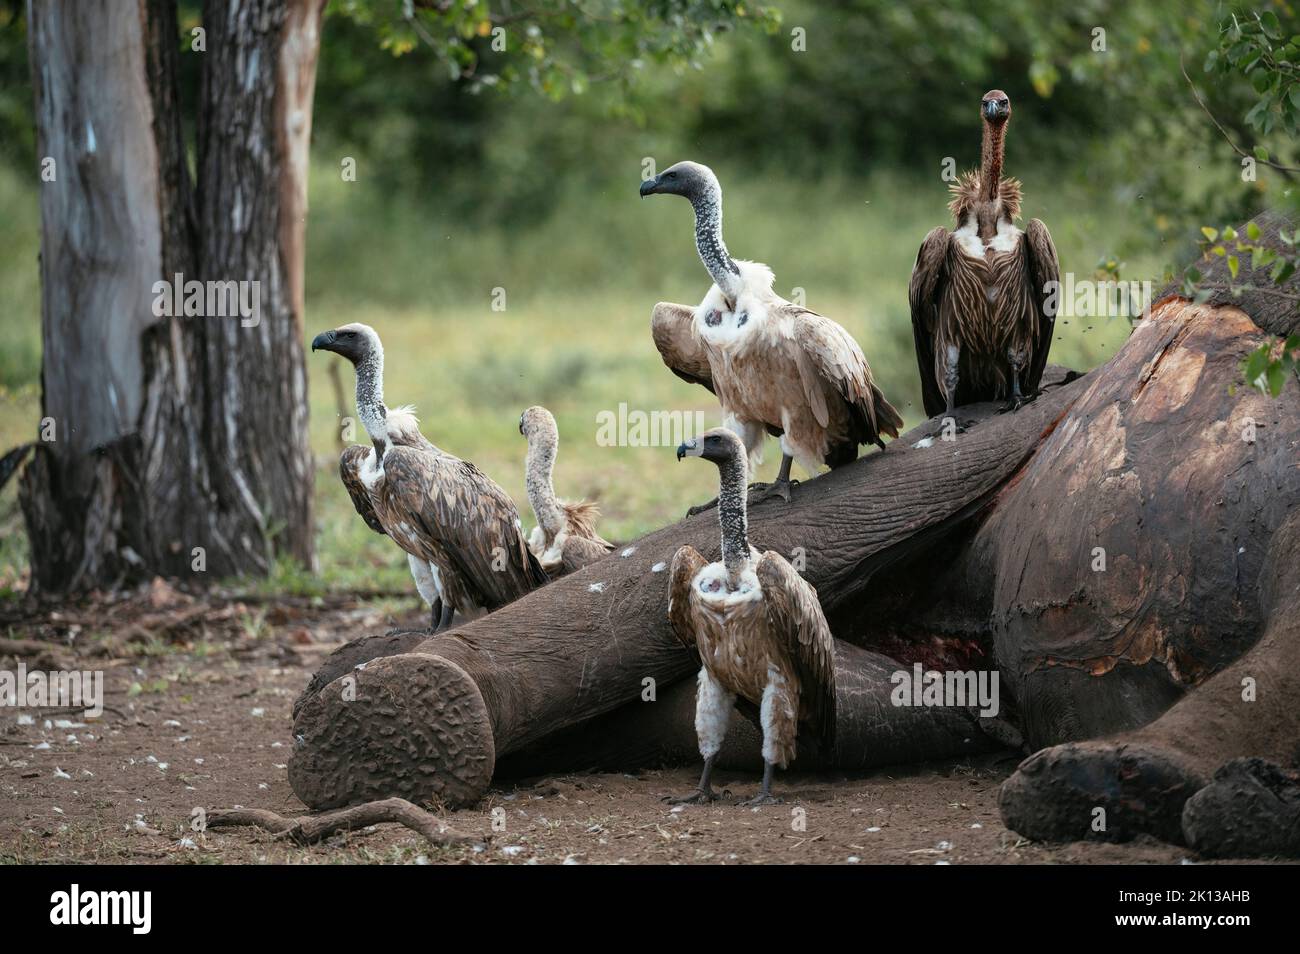 White-backed Vultures standing over Elephant carcass, Makuleke Contractual Park, Kruger National Park, South Africa, Africa Stock Photo